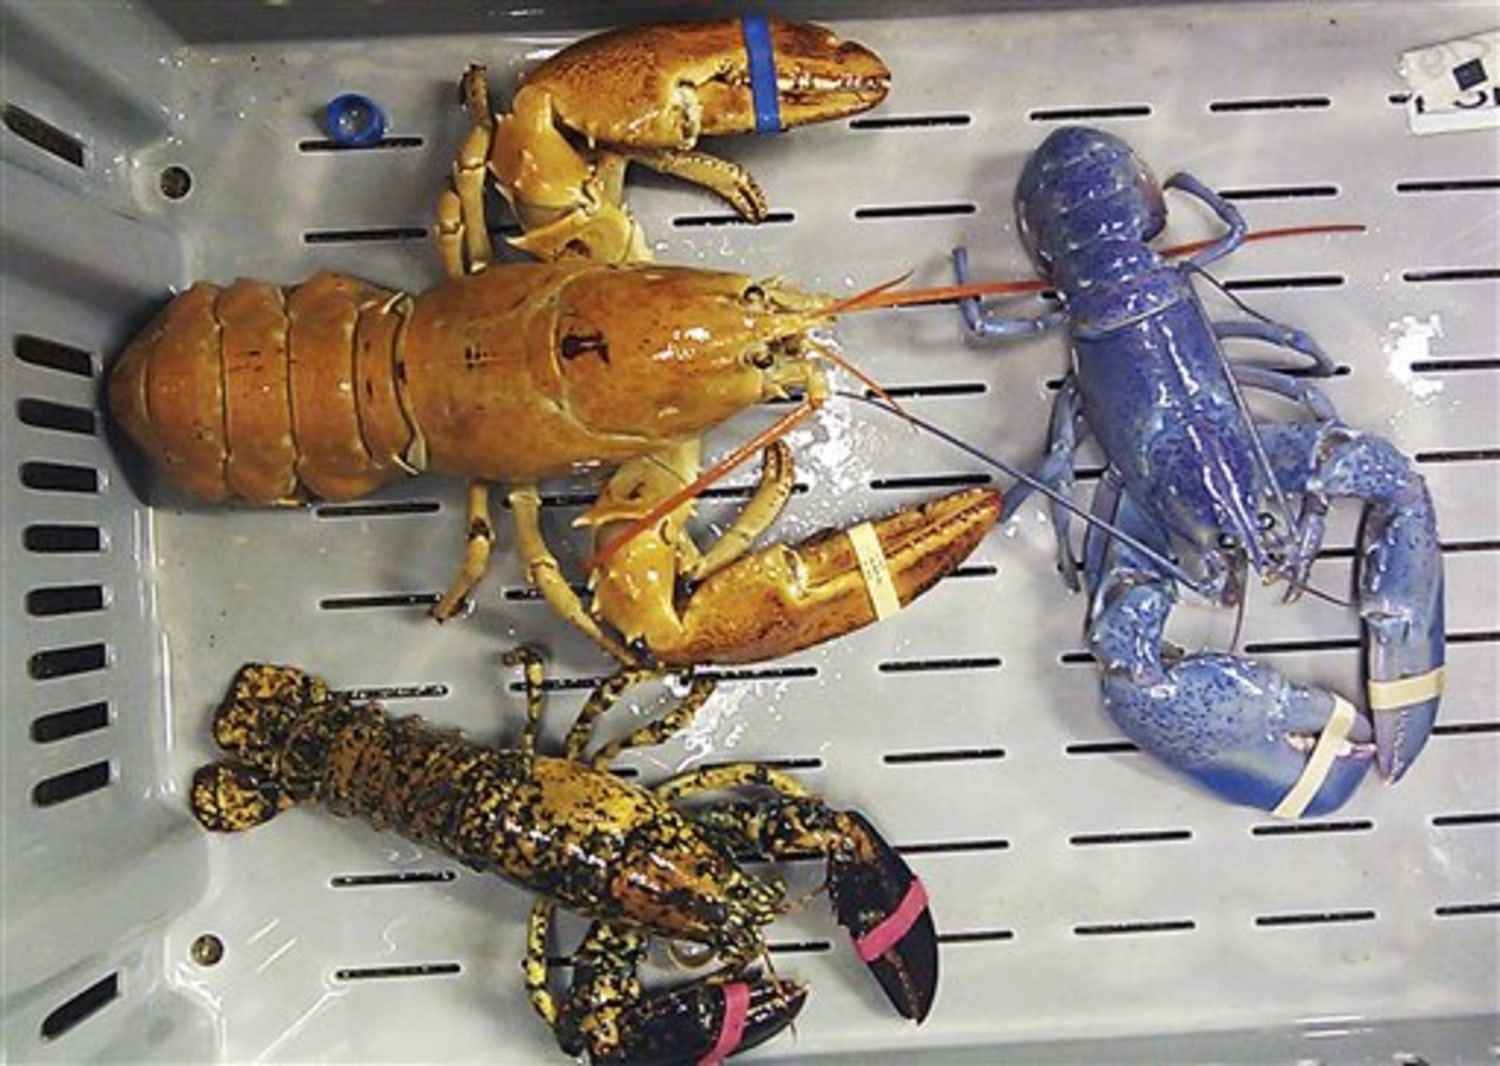 Lobstermen finding more odd colors in the catch